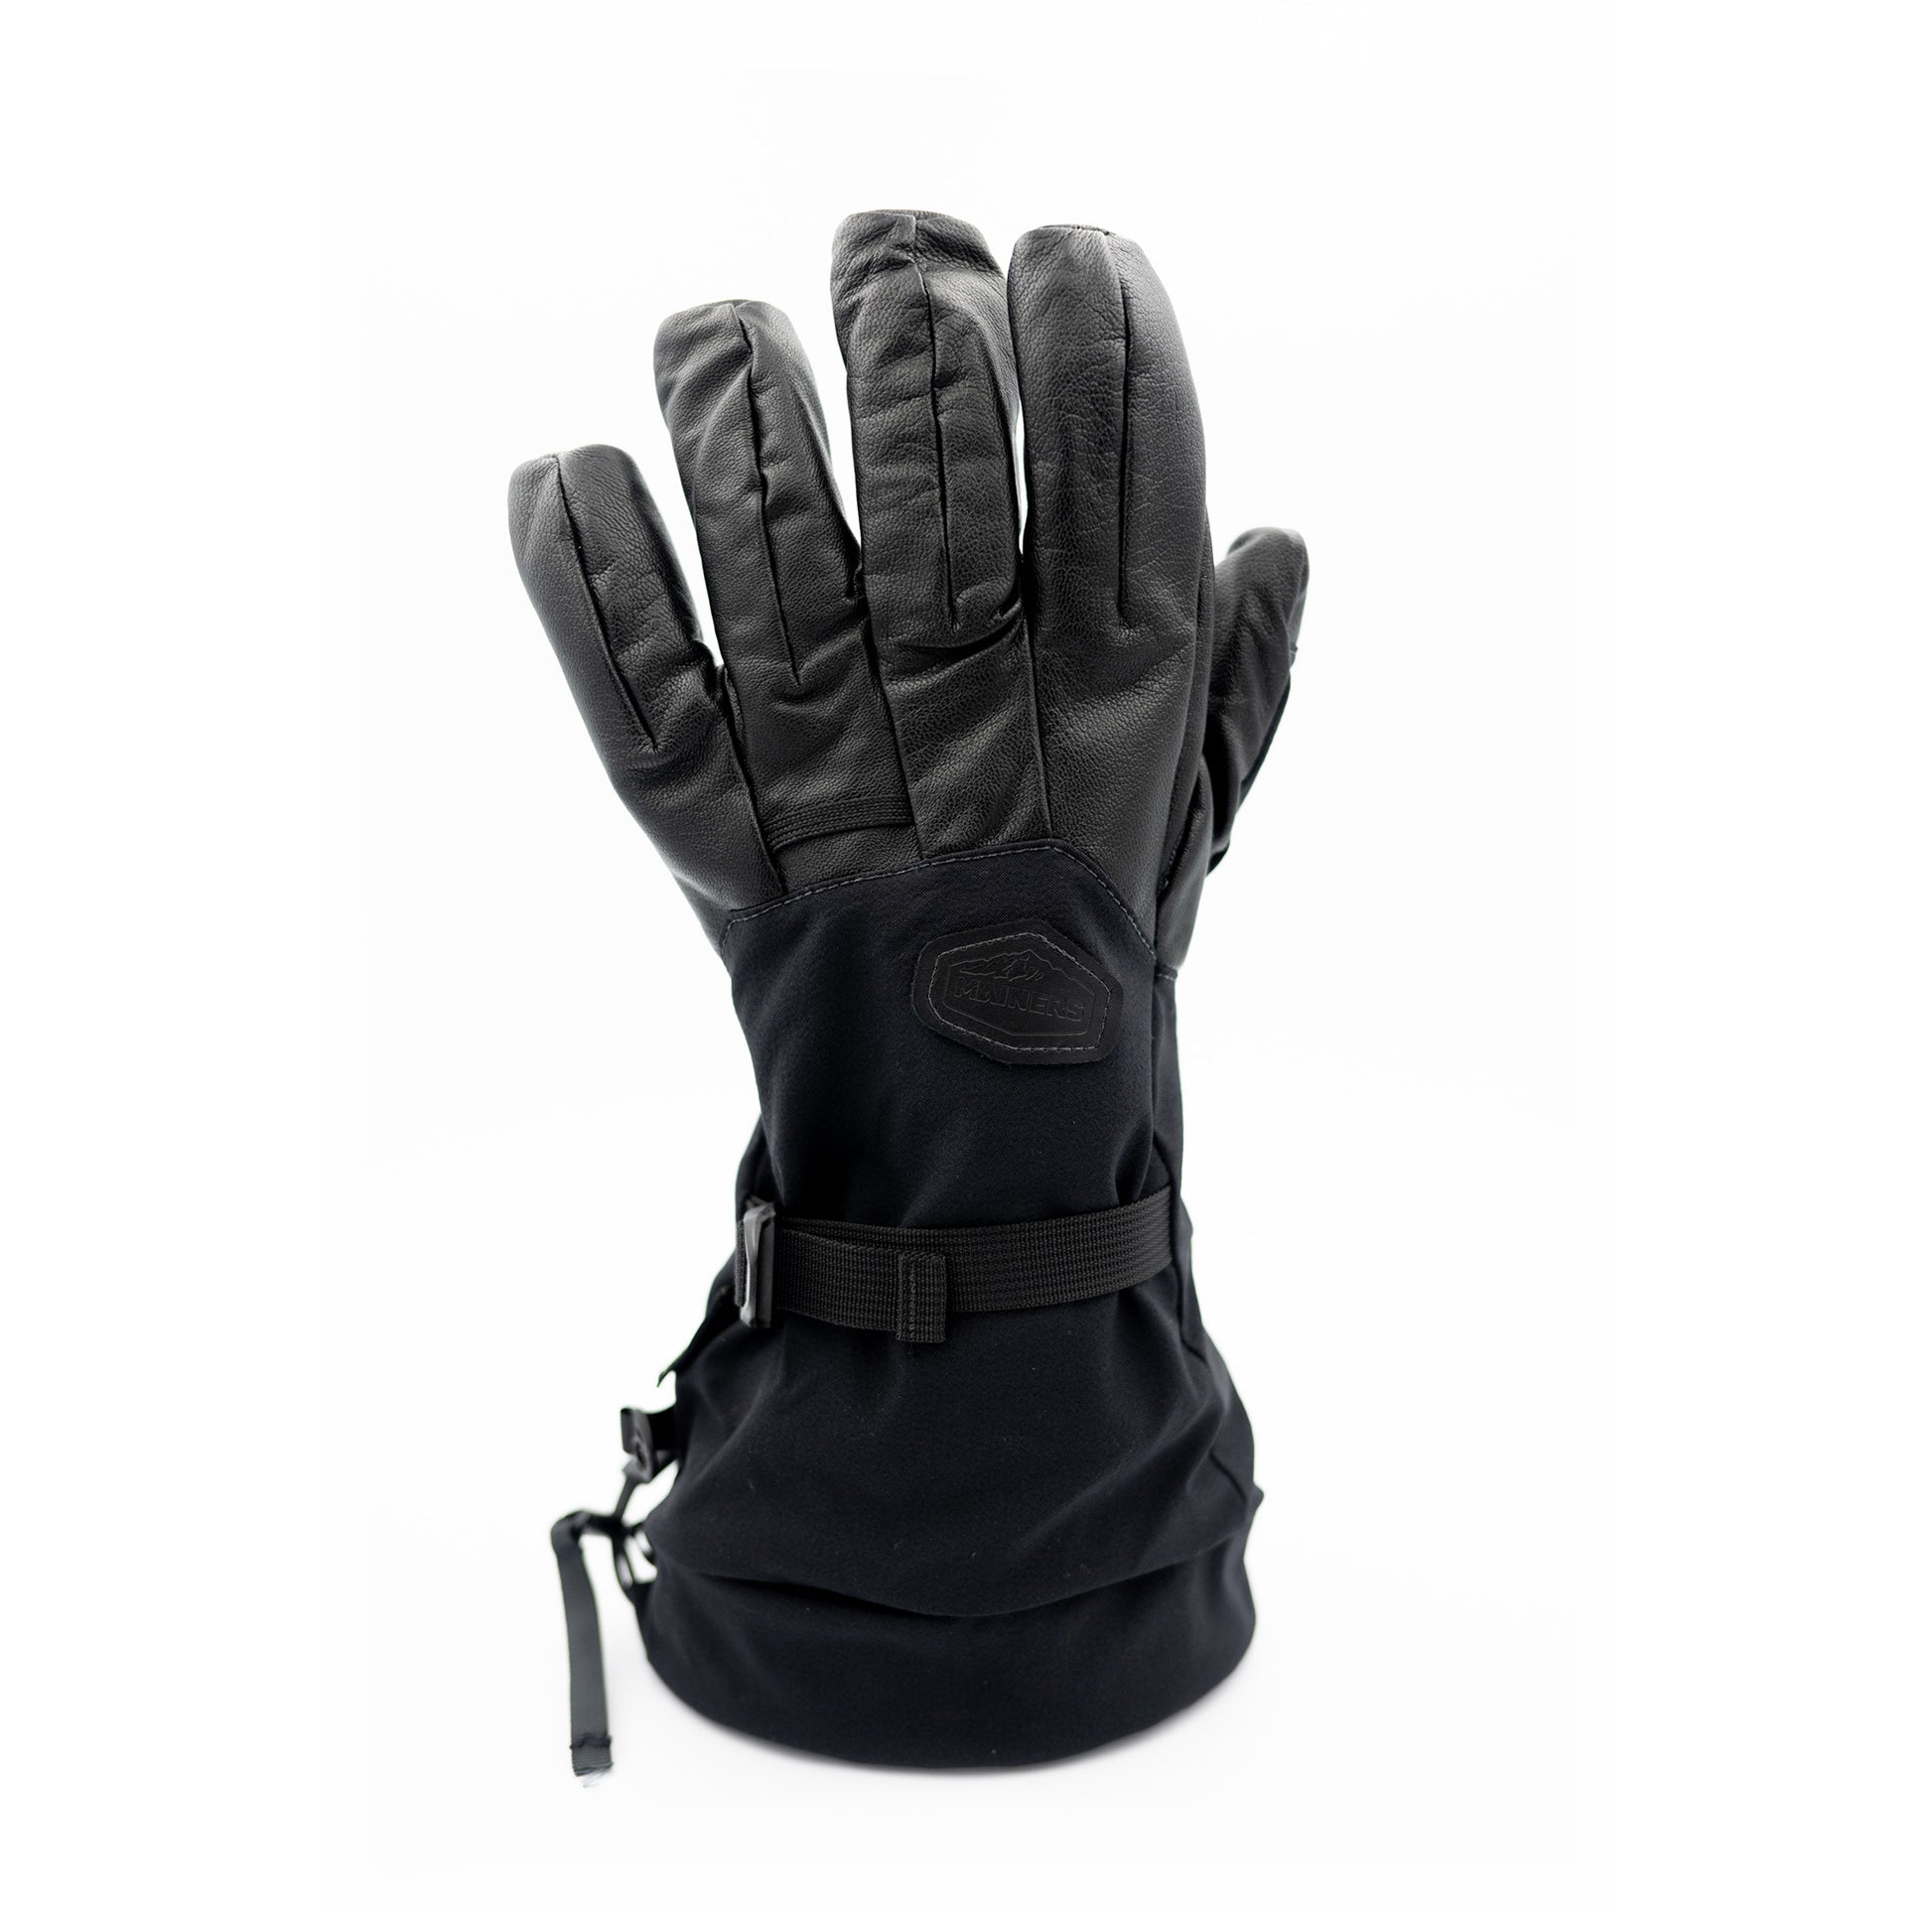 A pair of black Mainers ski gloves on a white background.